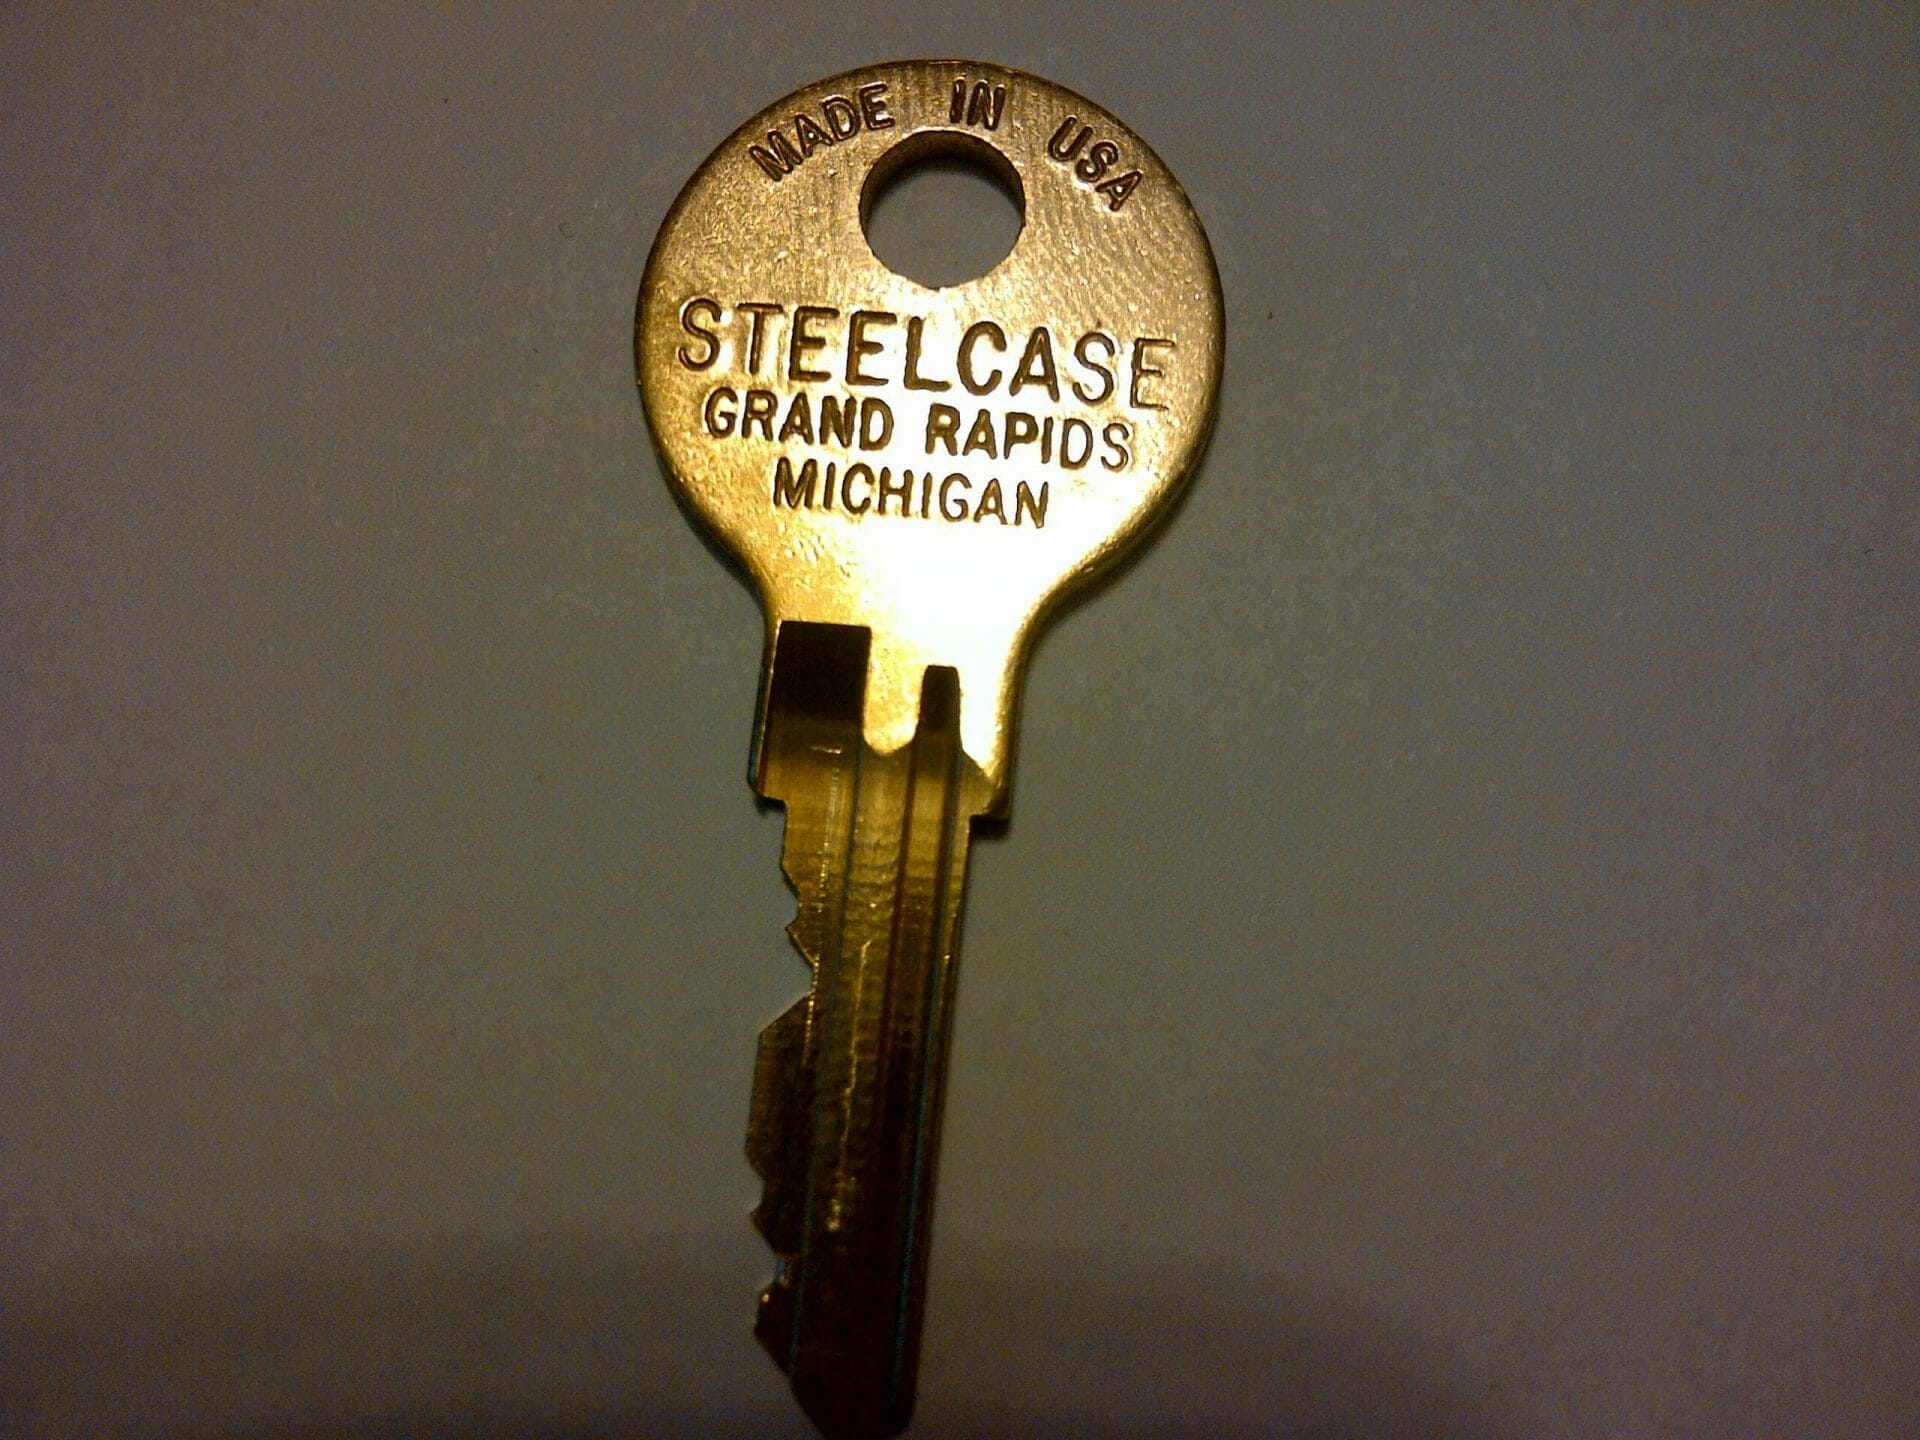 STEELCASE KEYS  FR 401 ANY 2 FOR $5.99 ALL NUMBERS IN STOCK FR 305-460 